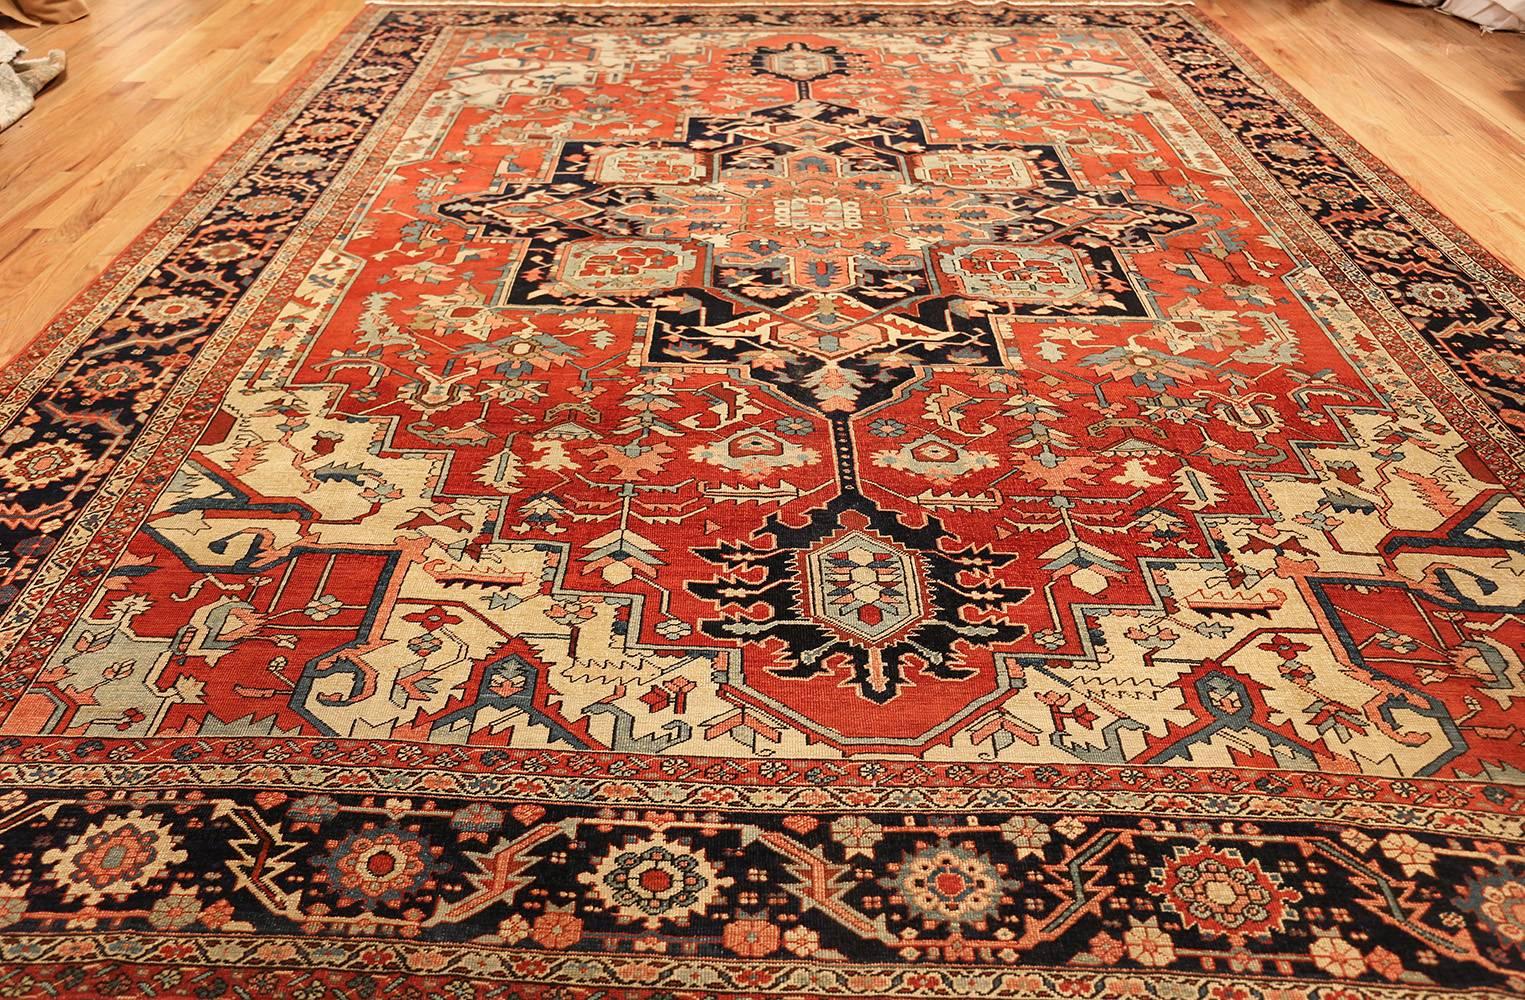 Antique Serapi Persian Rug. Size: 10 ft 4 in x 13 ft 6 in (3.15 m x 4.11 m) 2